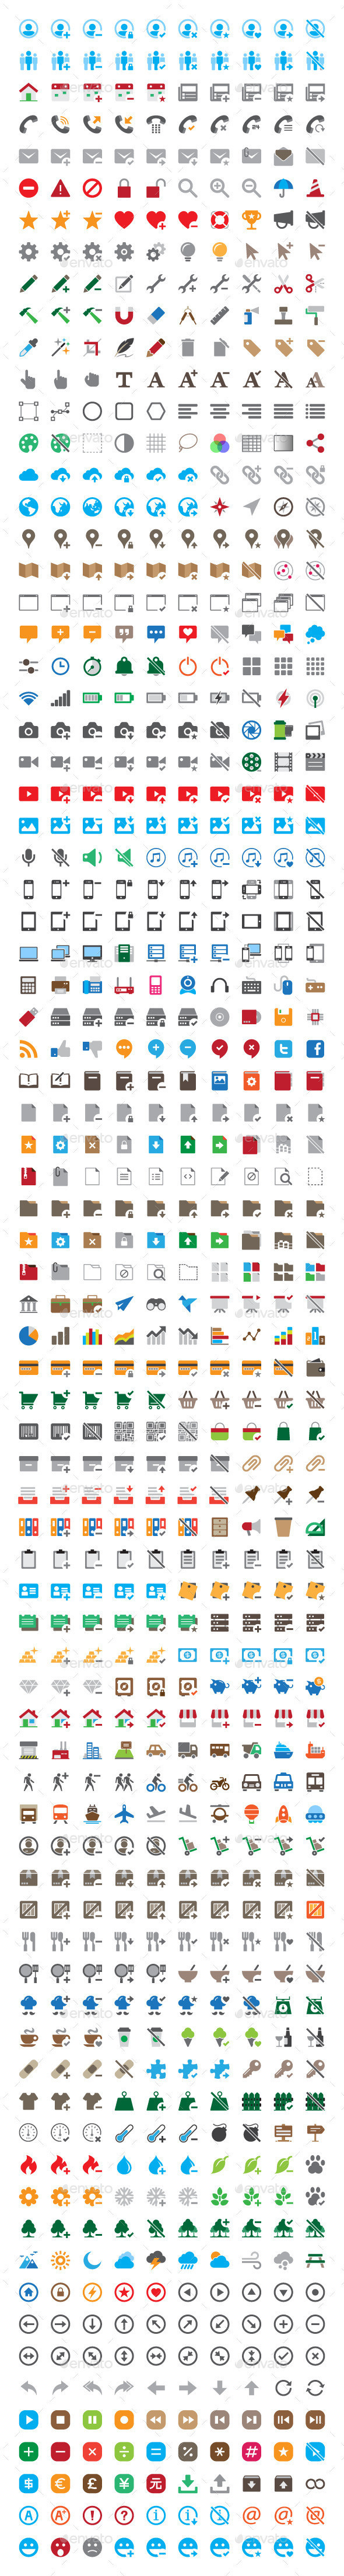 800 vector icons